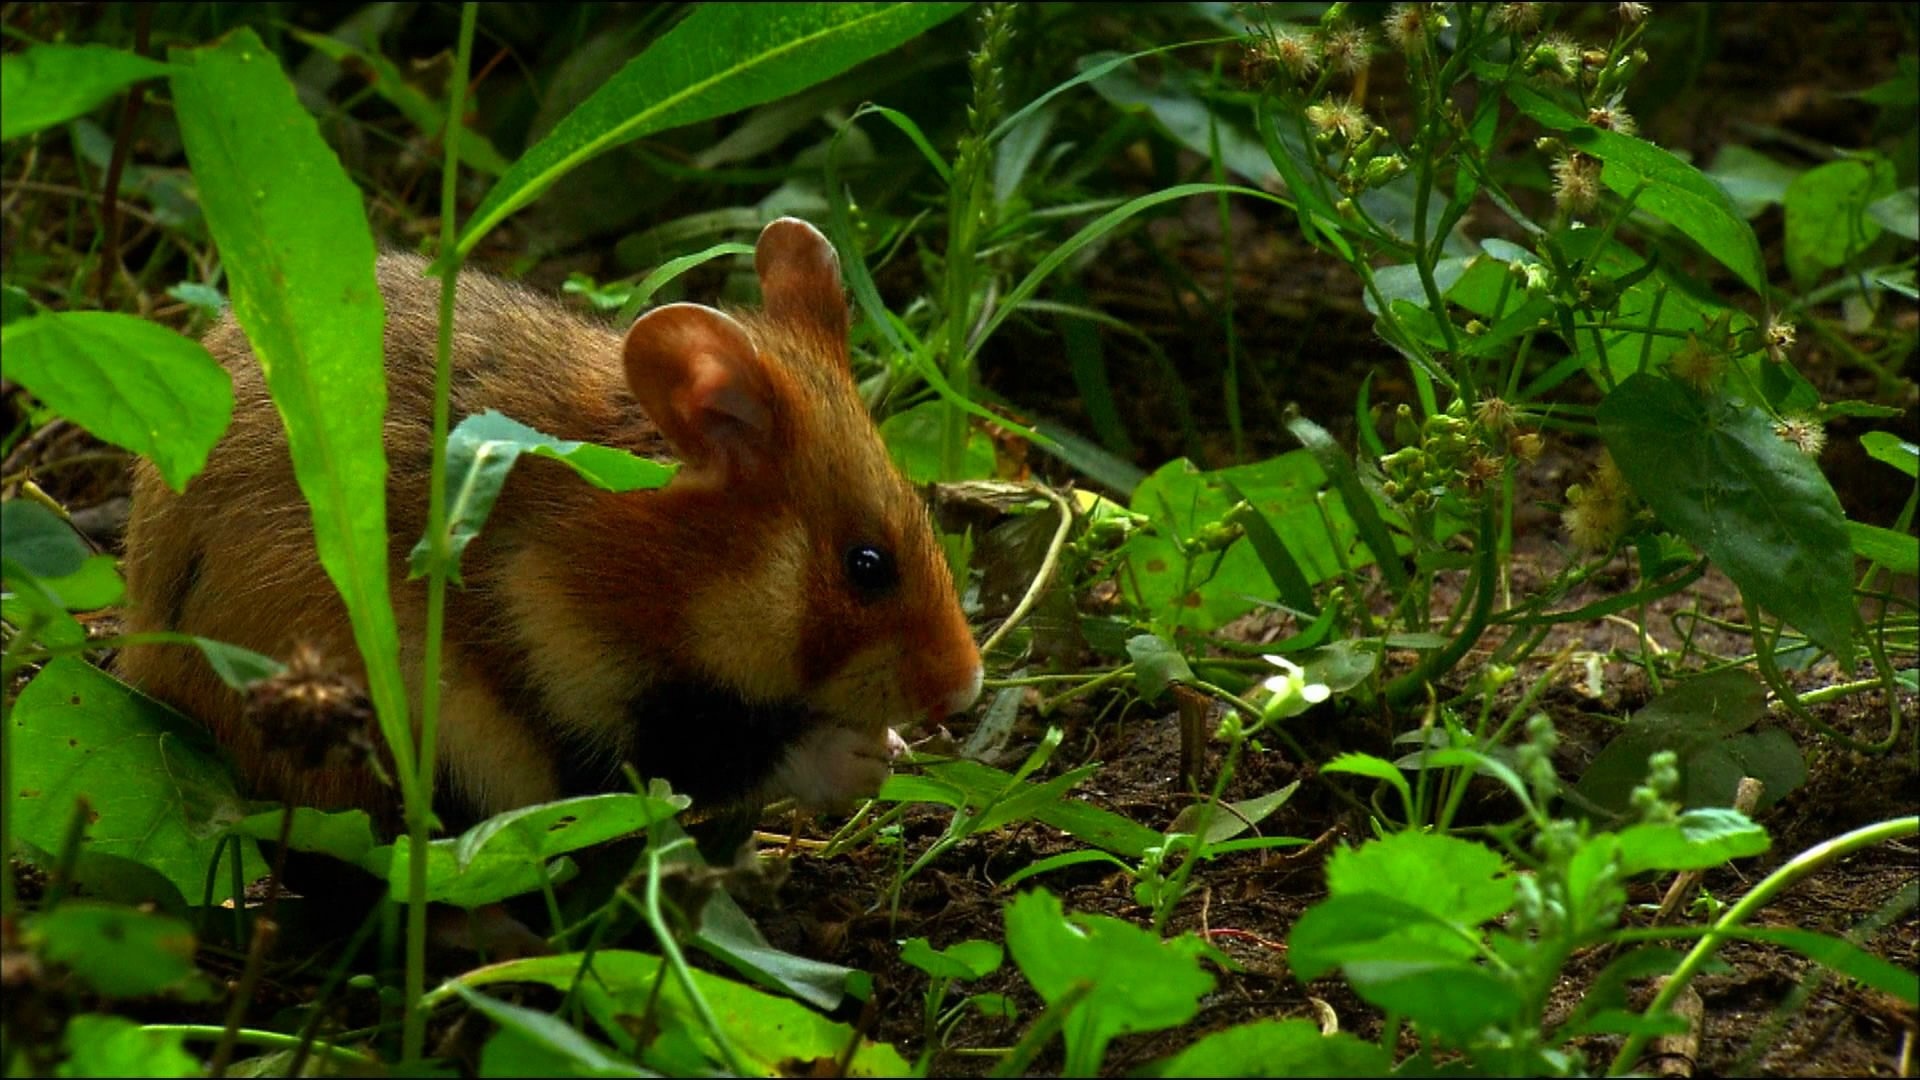 Hamster and mouse wallpapers, Jungle forest, Animal backgrounds, HD, 1920x1080 Full HD Desktop